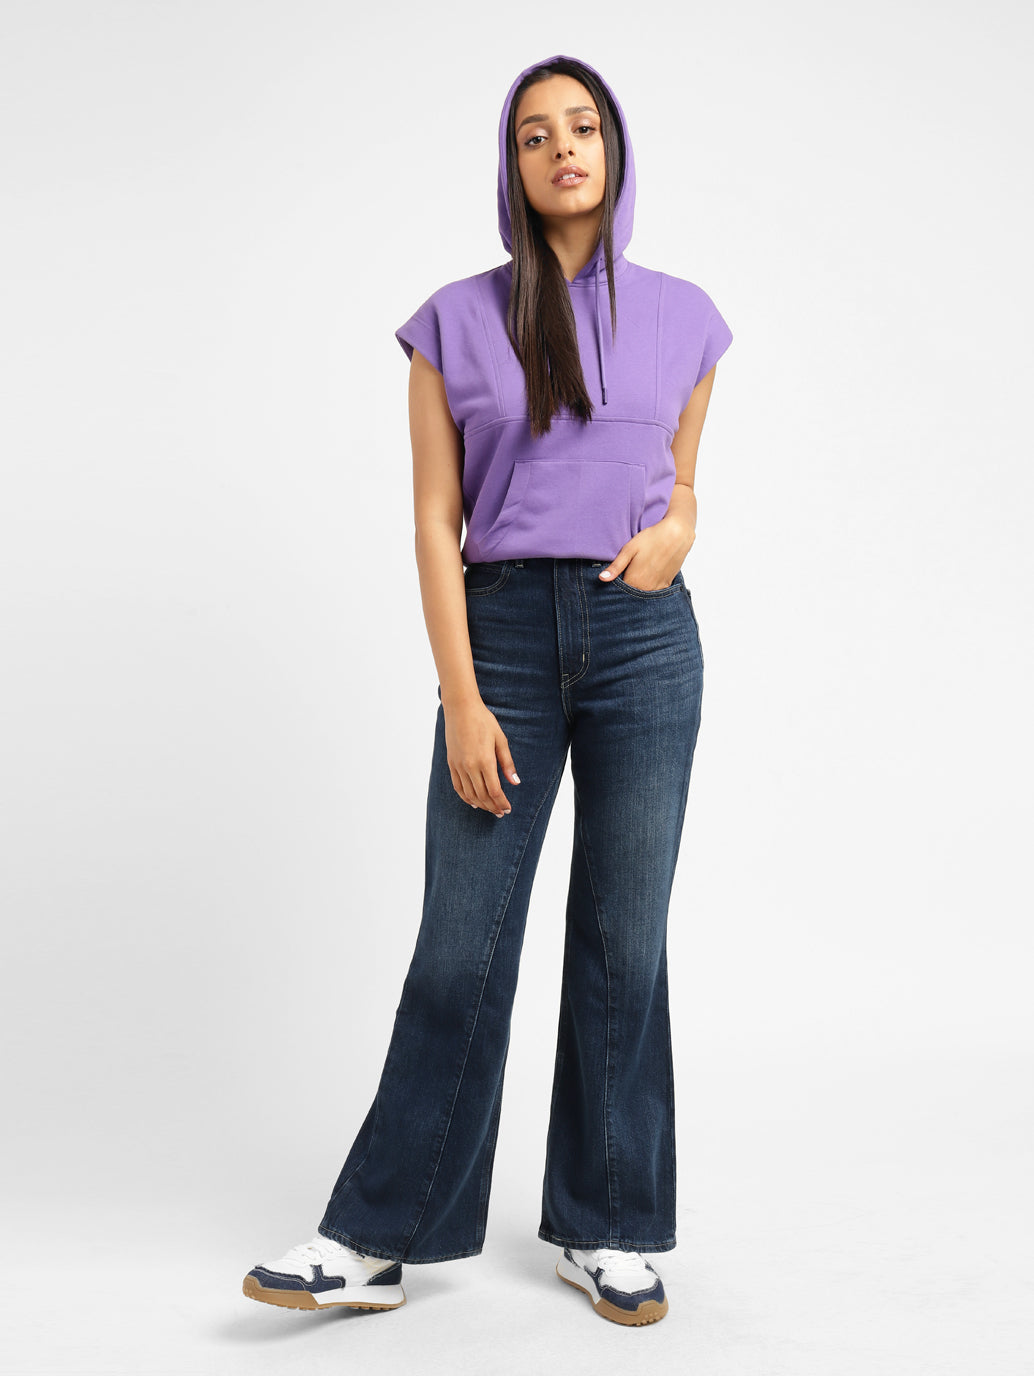 T Party Fashion Boot Cut & Flare Pants & Jumpsuits for Women